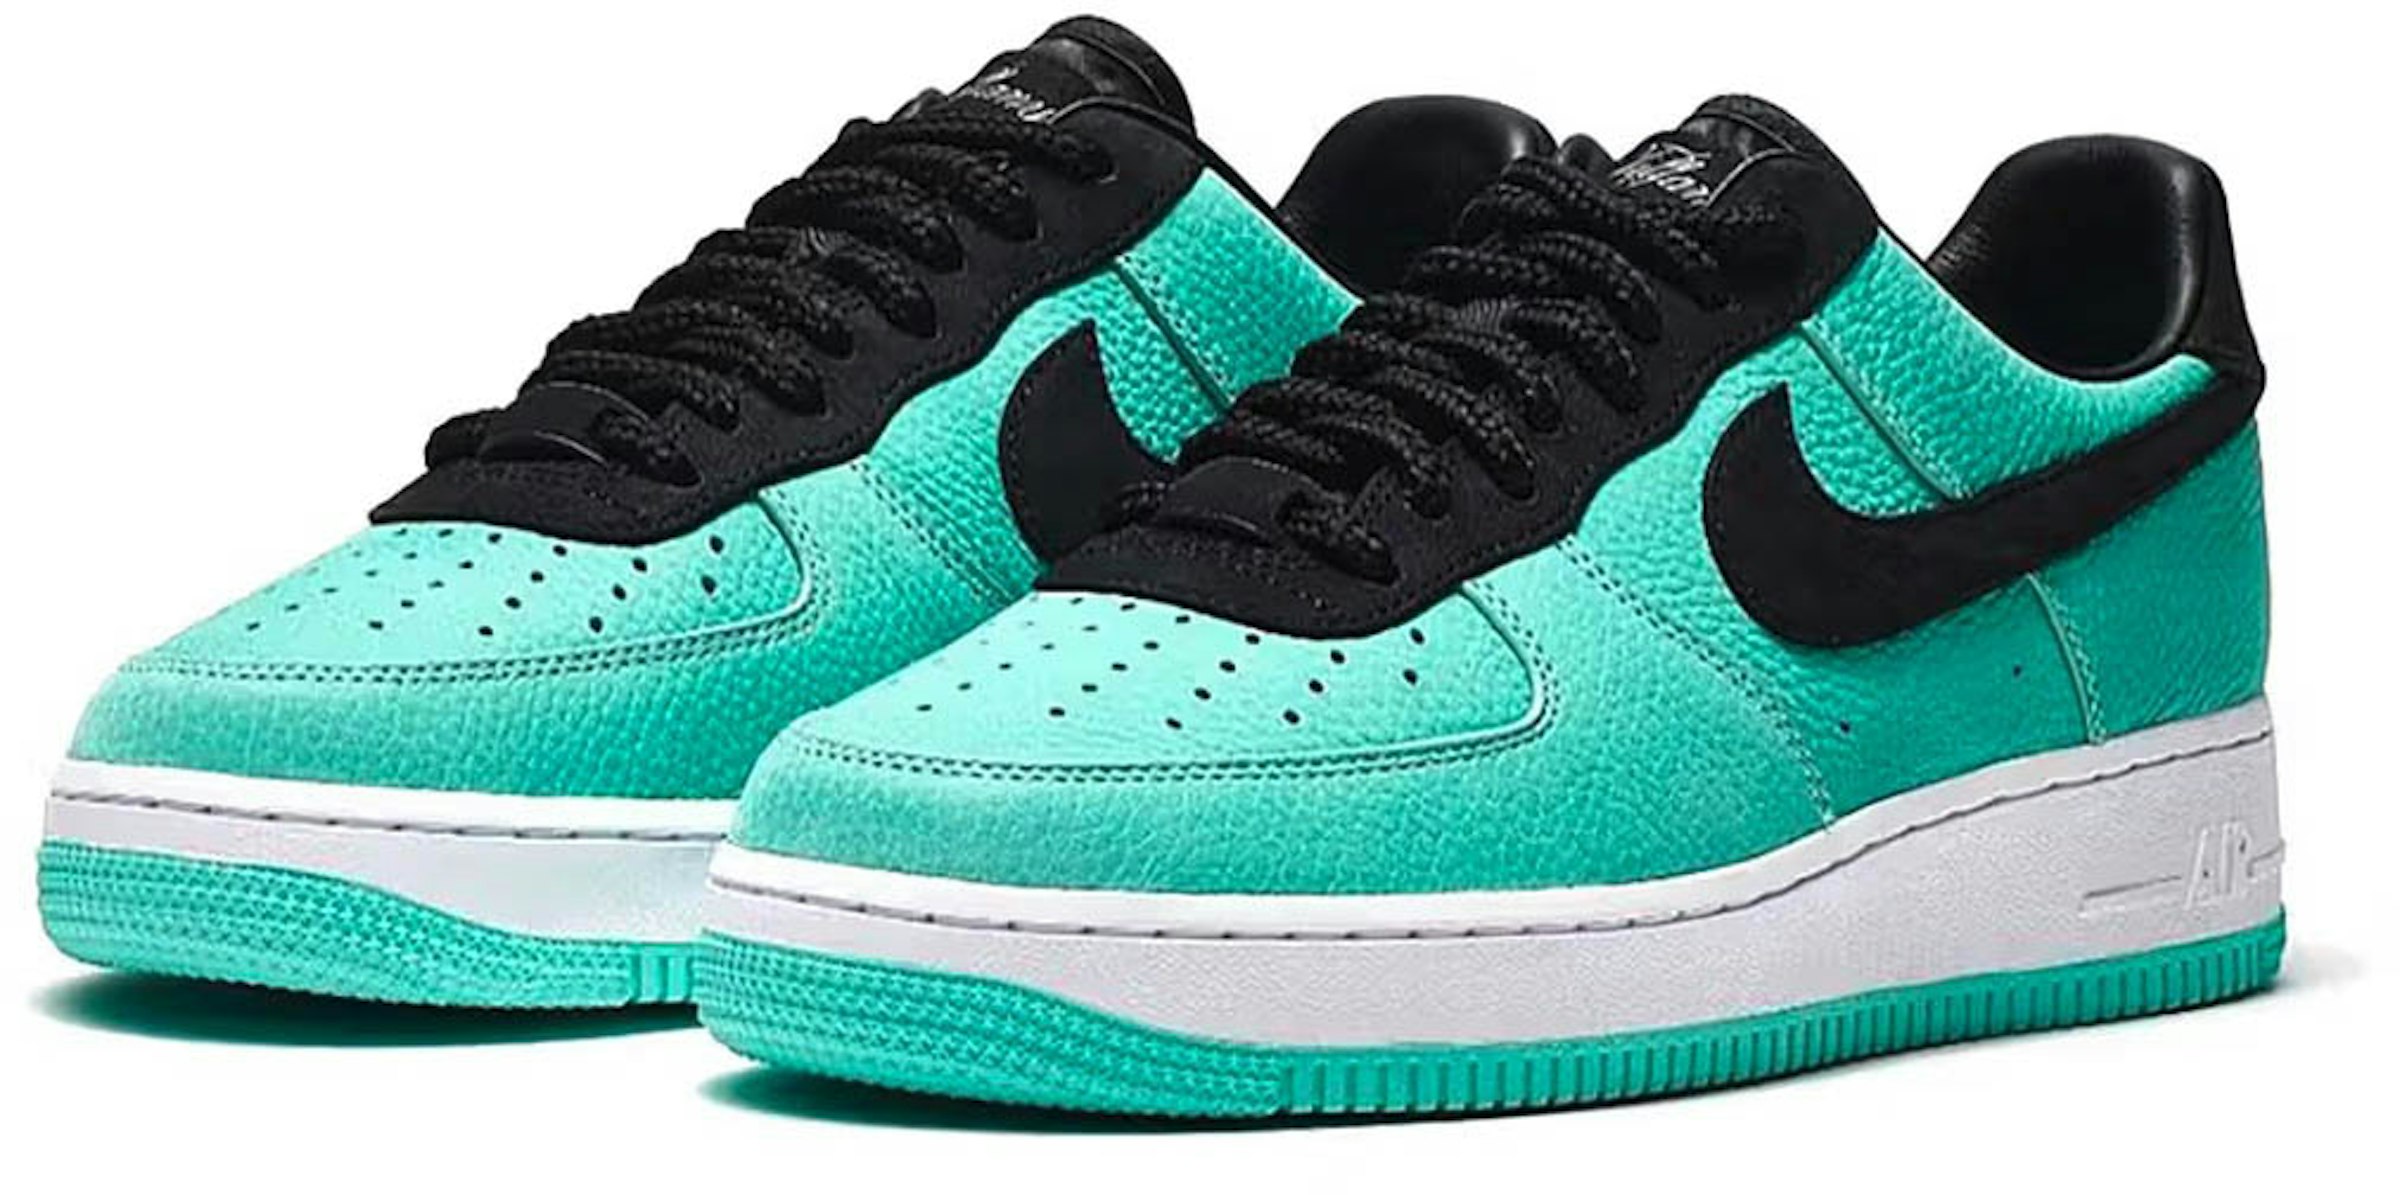 Glorioso Injusto Extremo Nike Air Force 1 Low Tiffany & Co. 1837 (Friends and Family) Men's -  DZ1382-900 - US